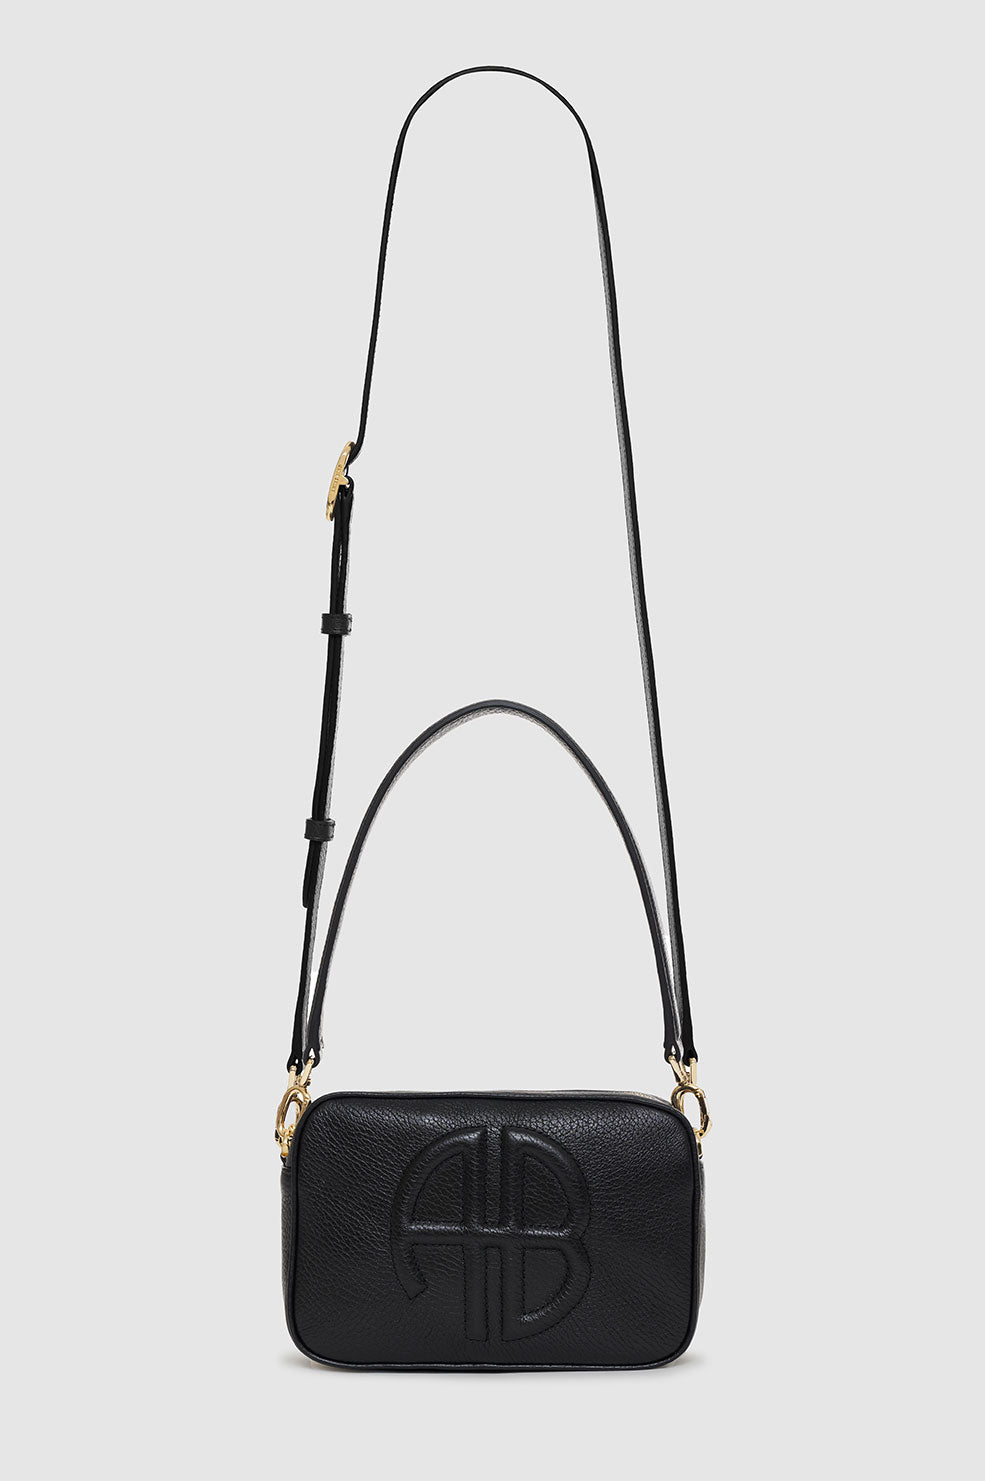 ANINE BING Lili Bag - Black Pebbled - Front View Additional Strap